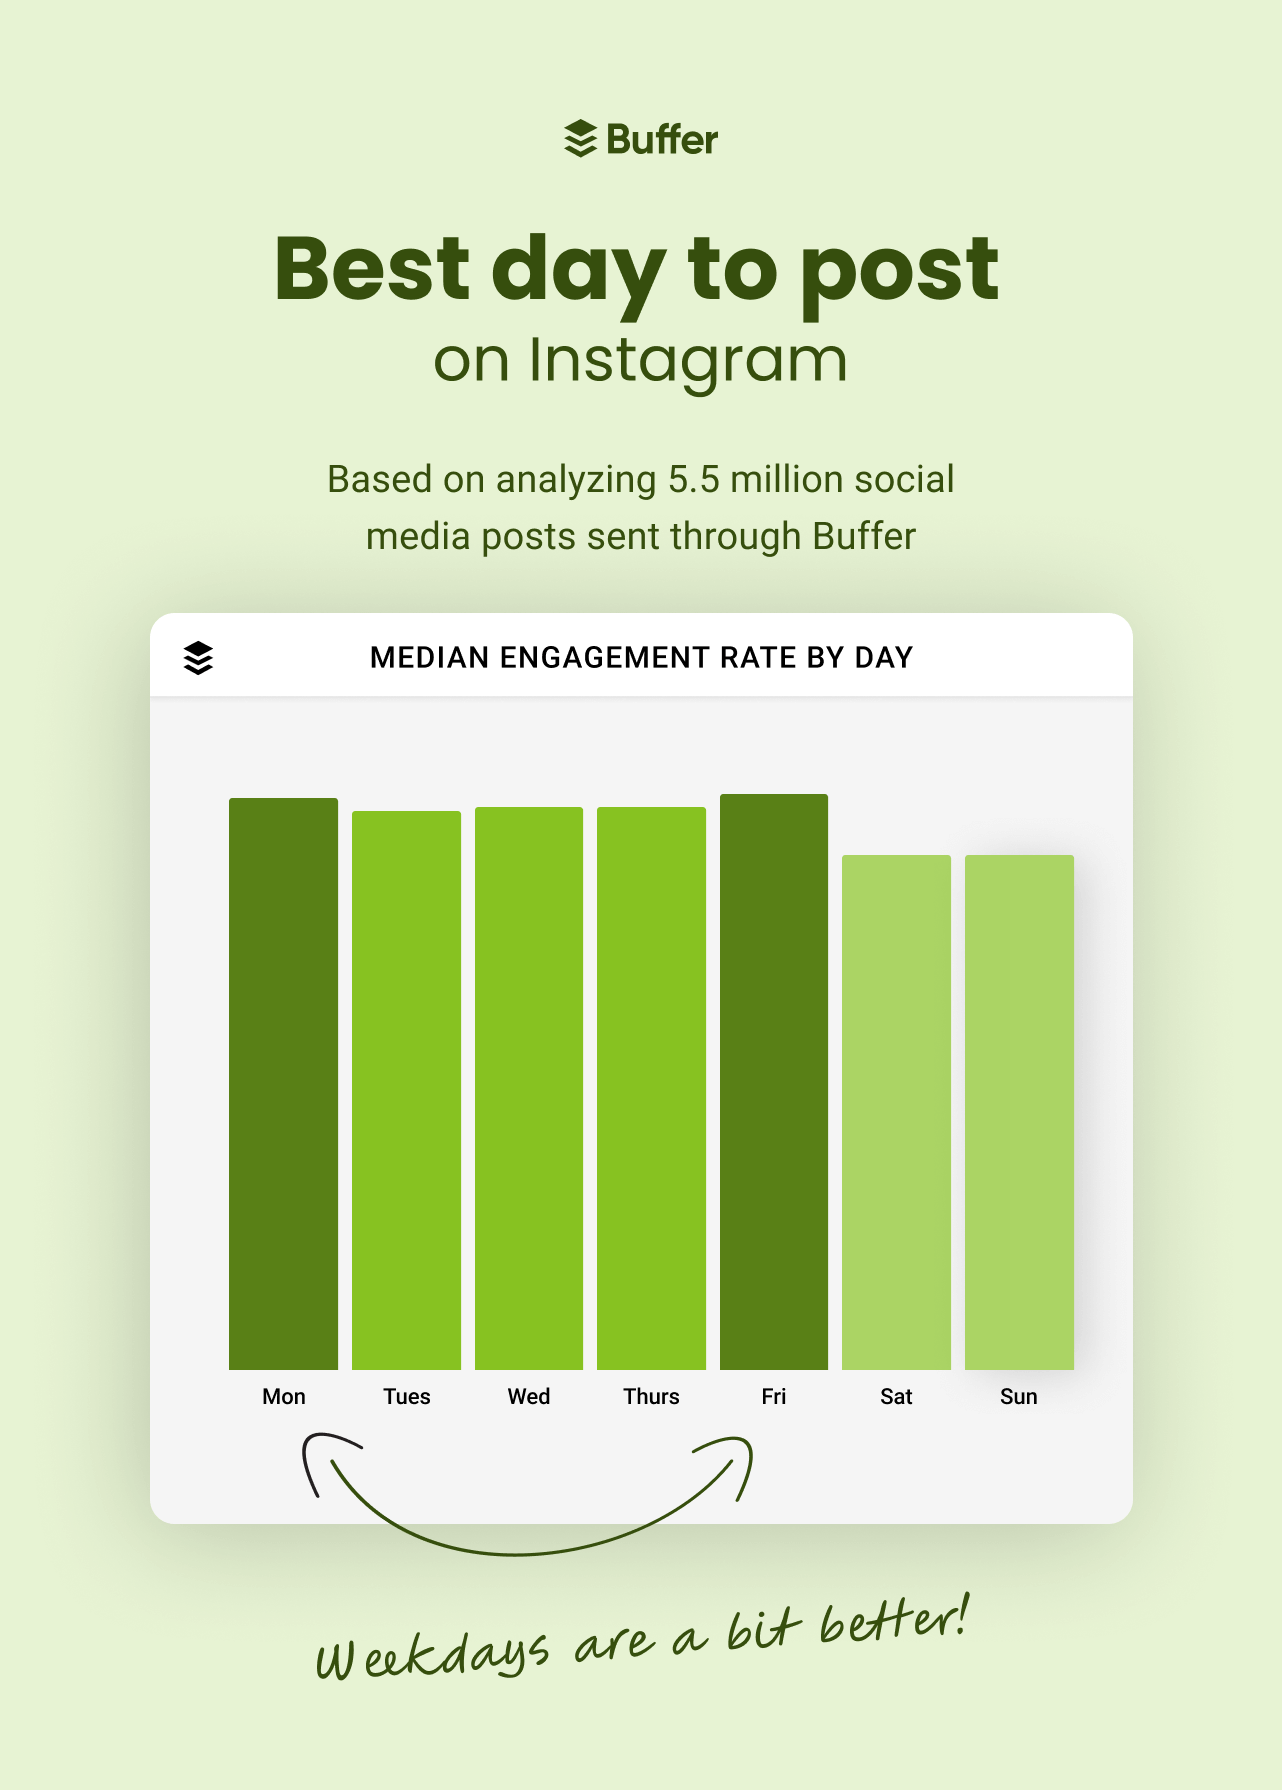 A graph analyzing data from Buffer shows the best days for posting on Instagram are Fridays and Mondays